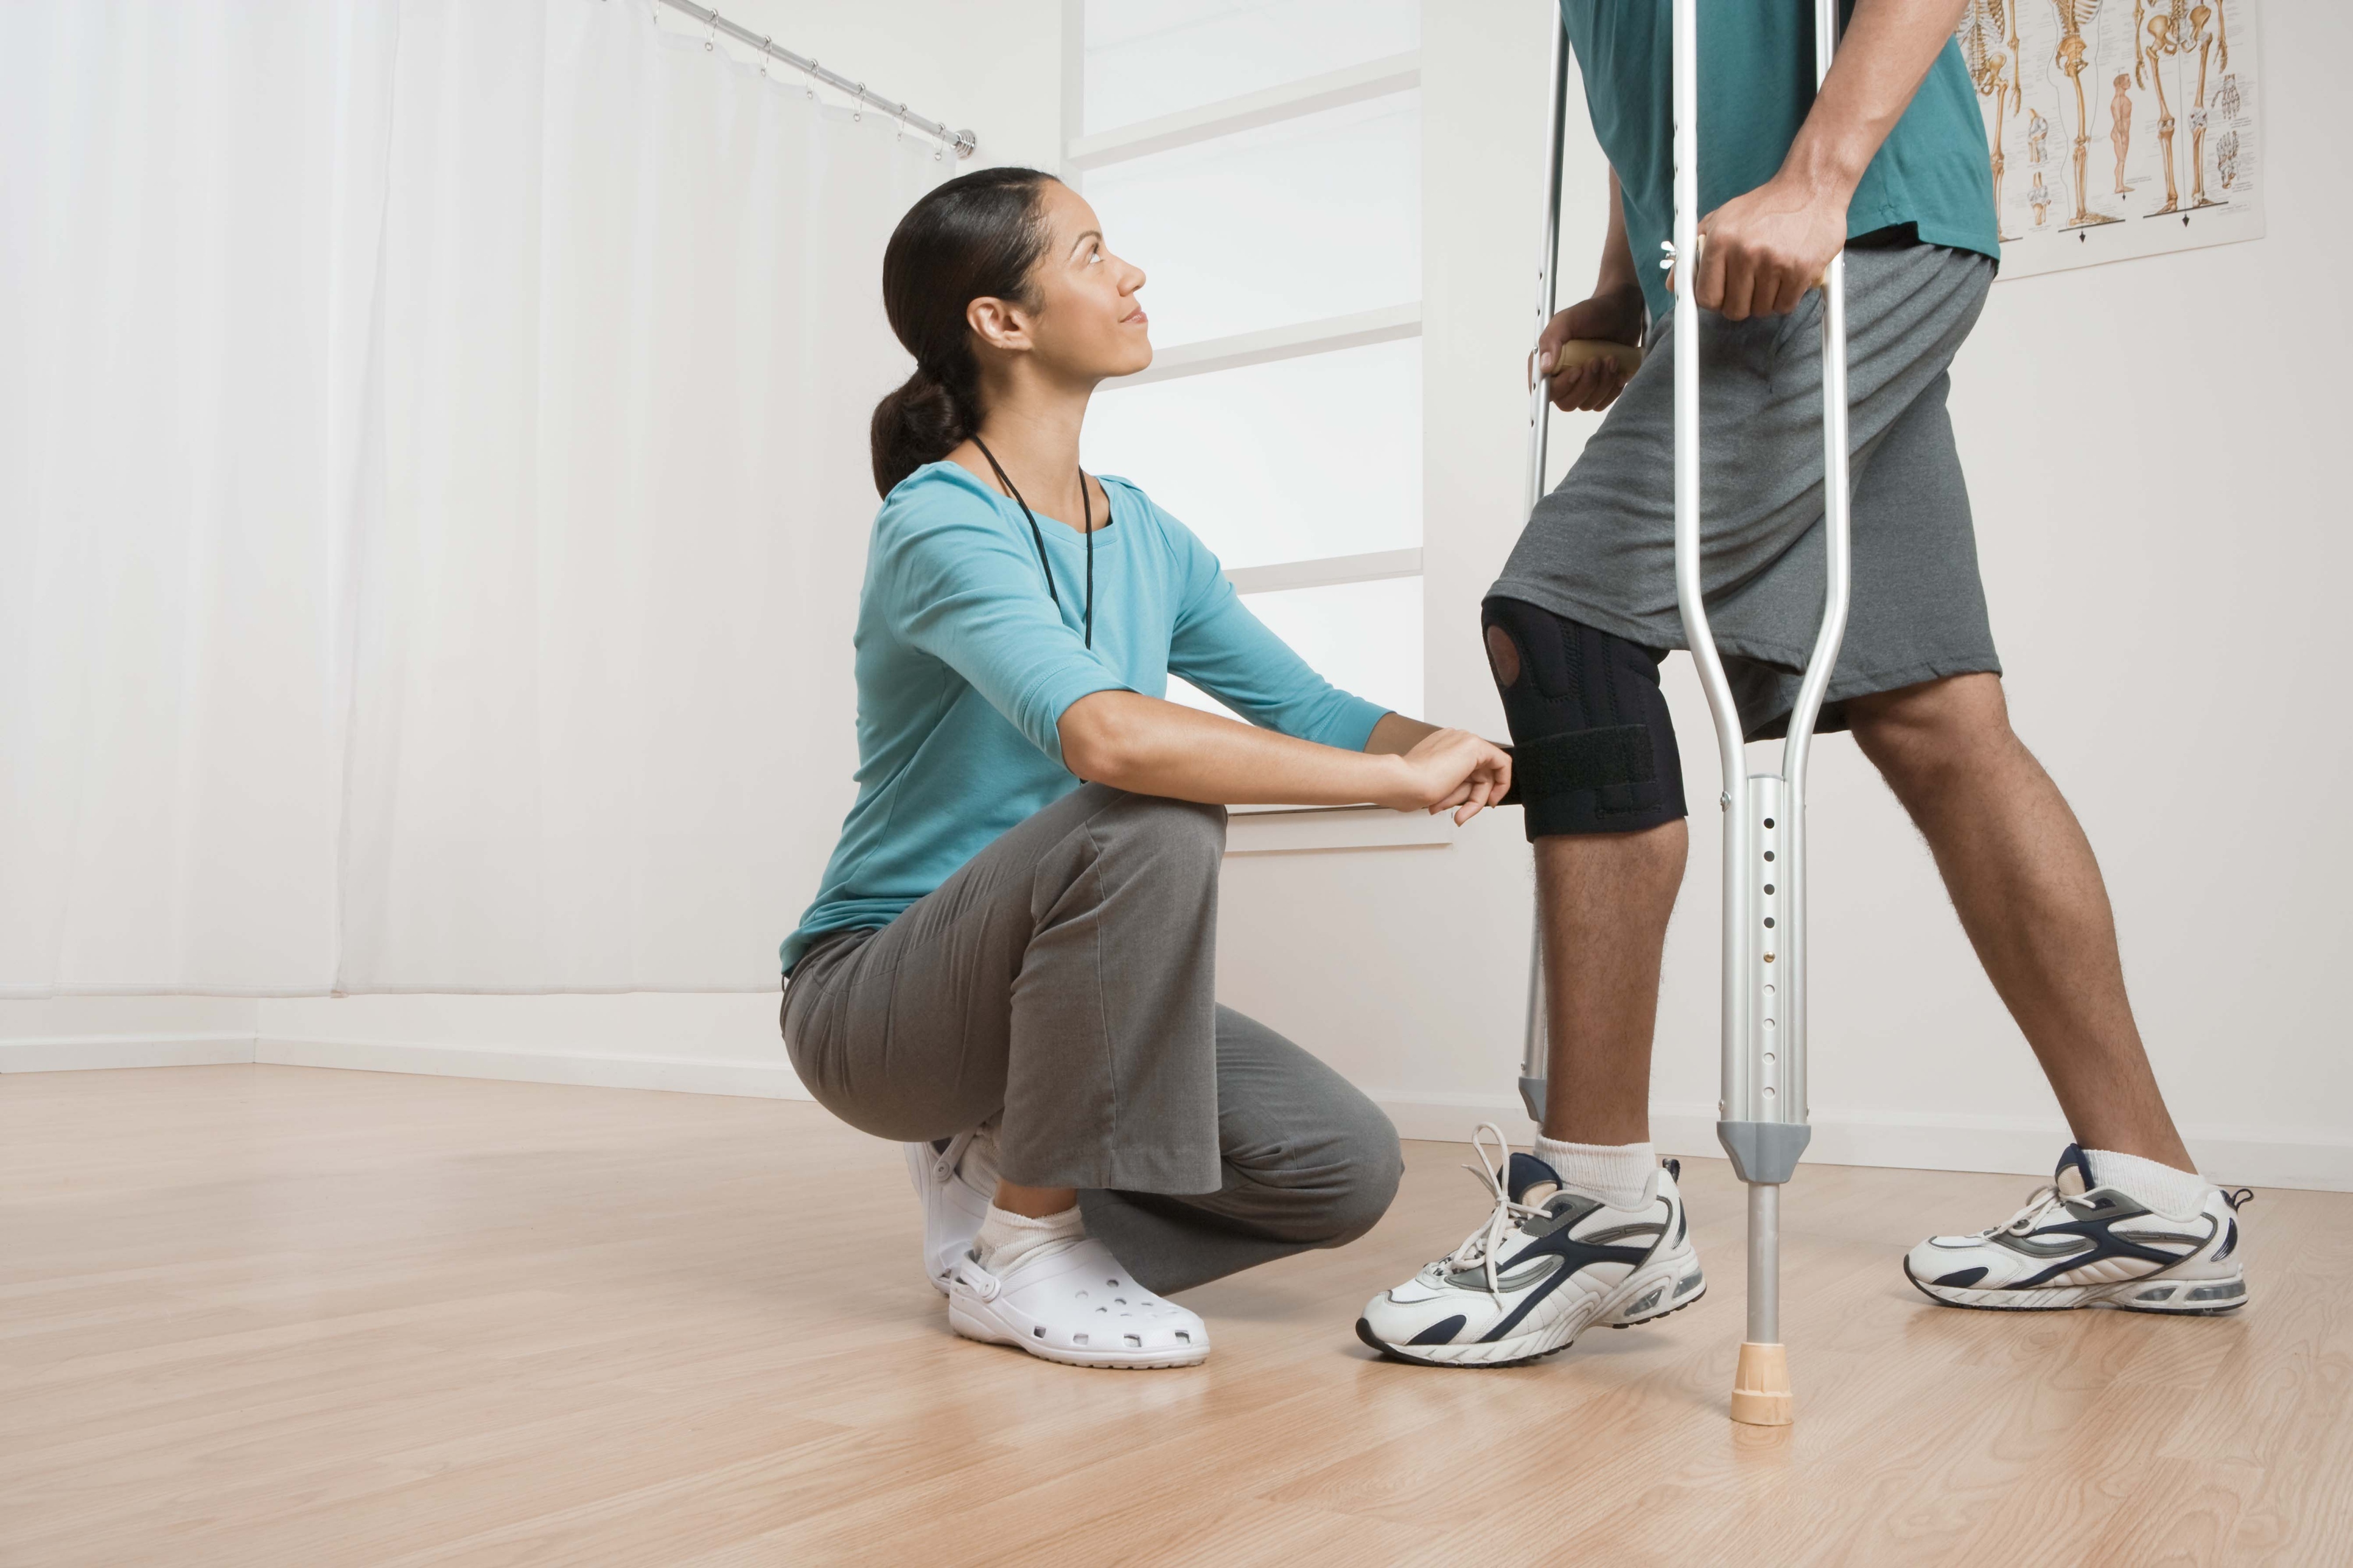 Physical therapist helping patient with crutches